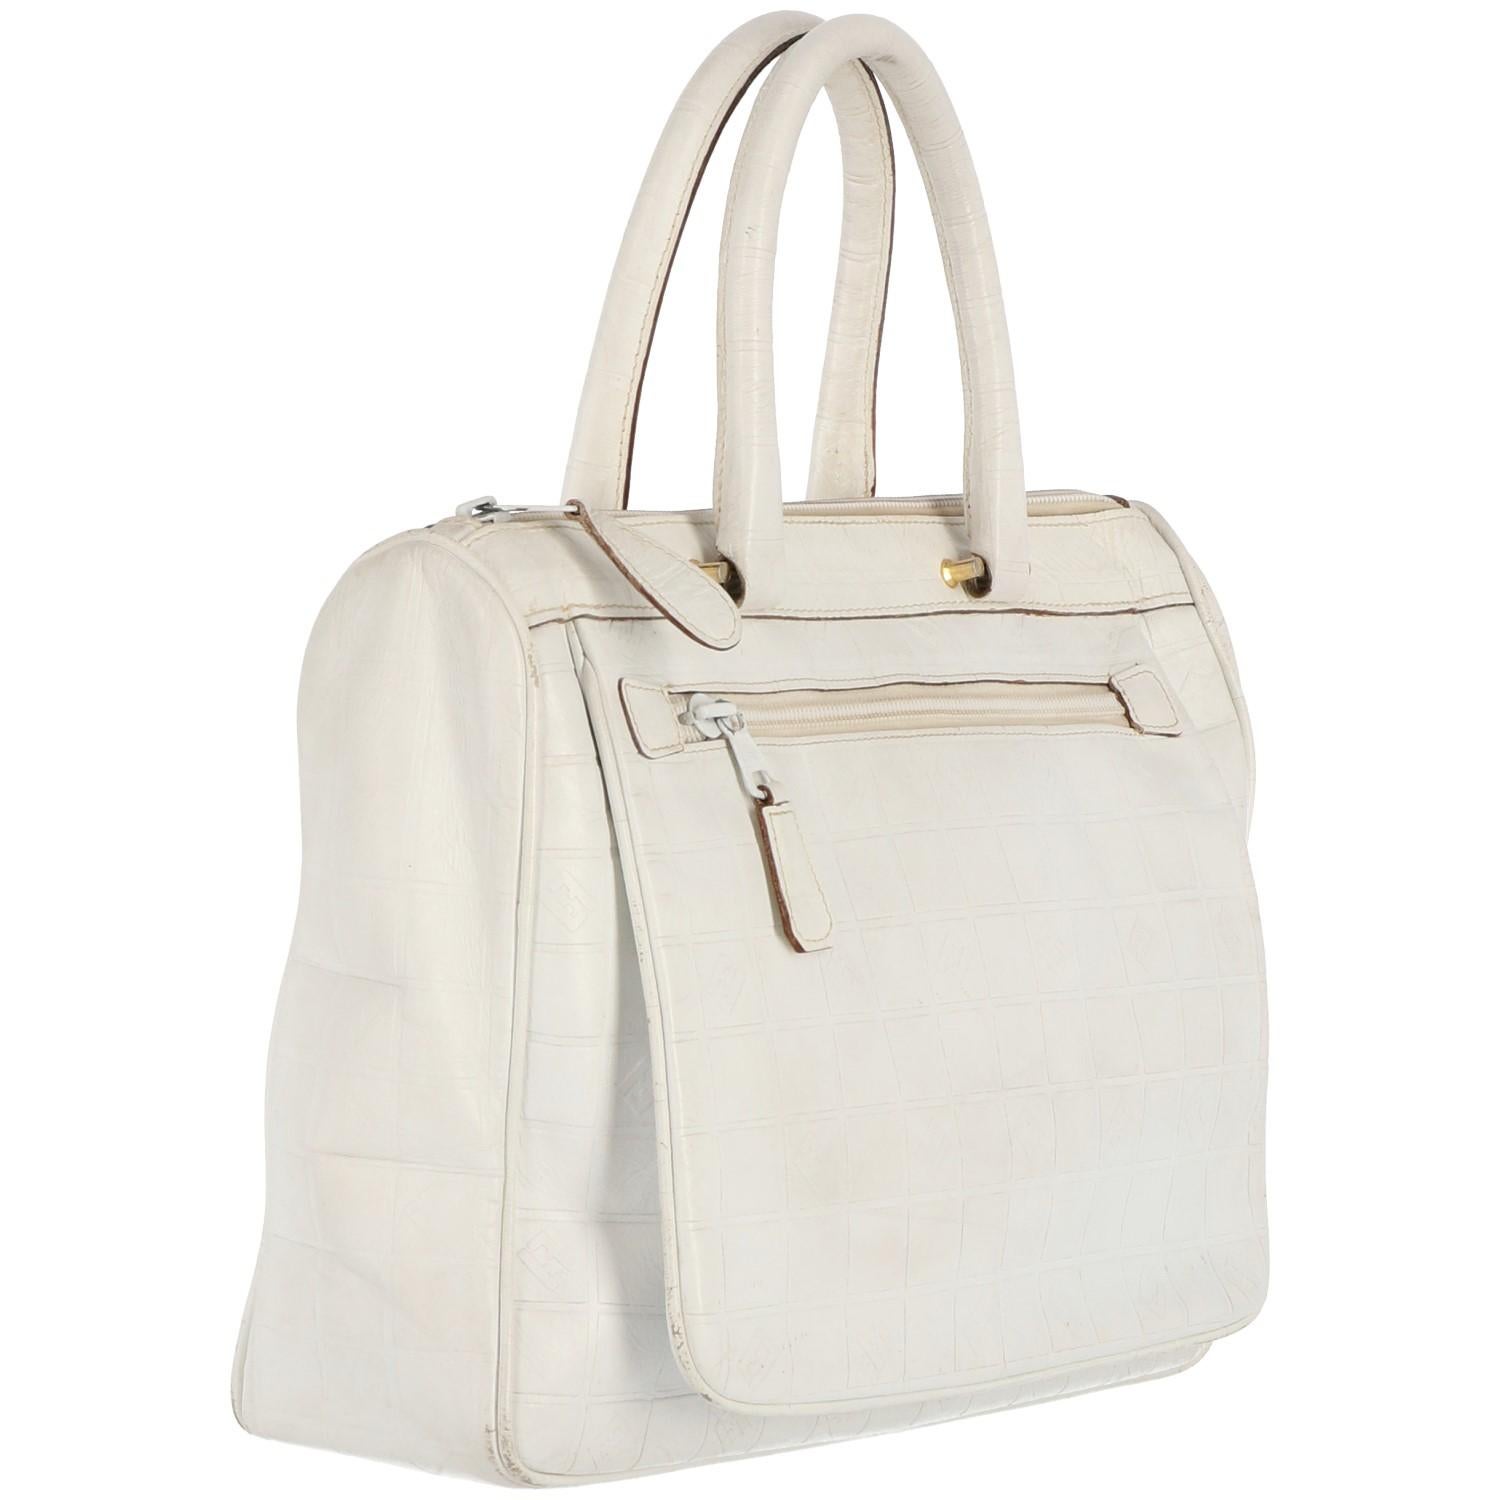 Fendi white printed leather handbag

Height: 21 cm
Width: 30 cm
Depth: 8,5 cm
Handle: 13 cm

The item is vintage: is in good conditions but shows signs of use on the leather, especially the edges.